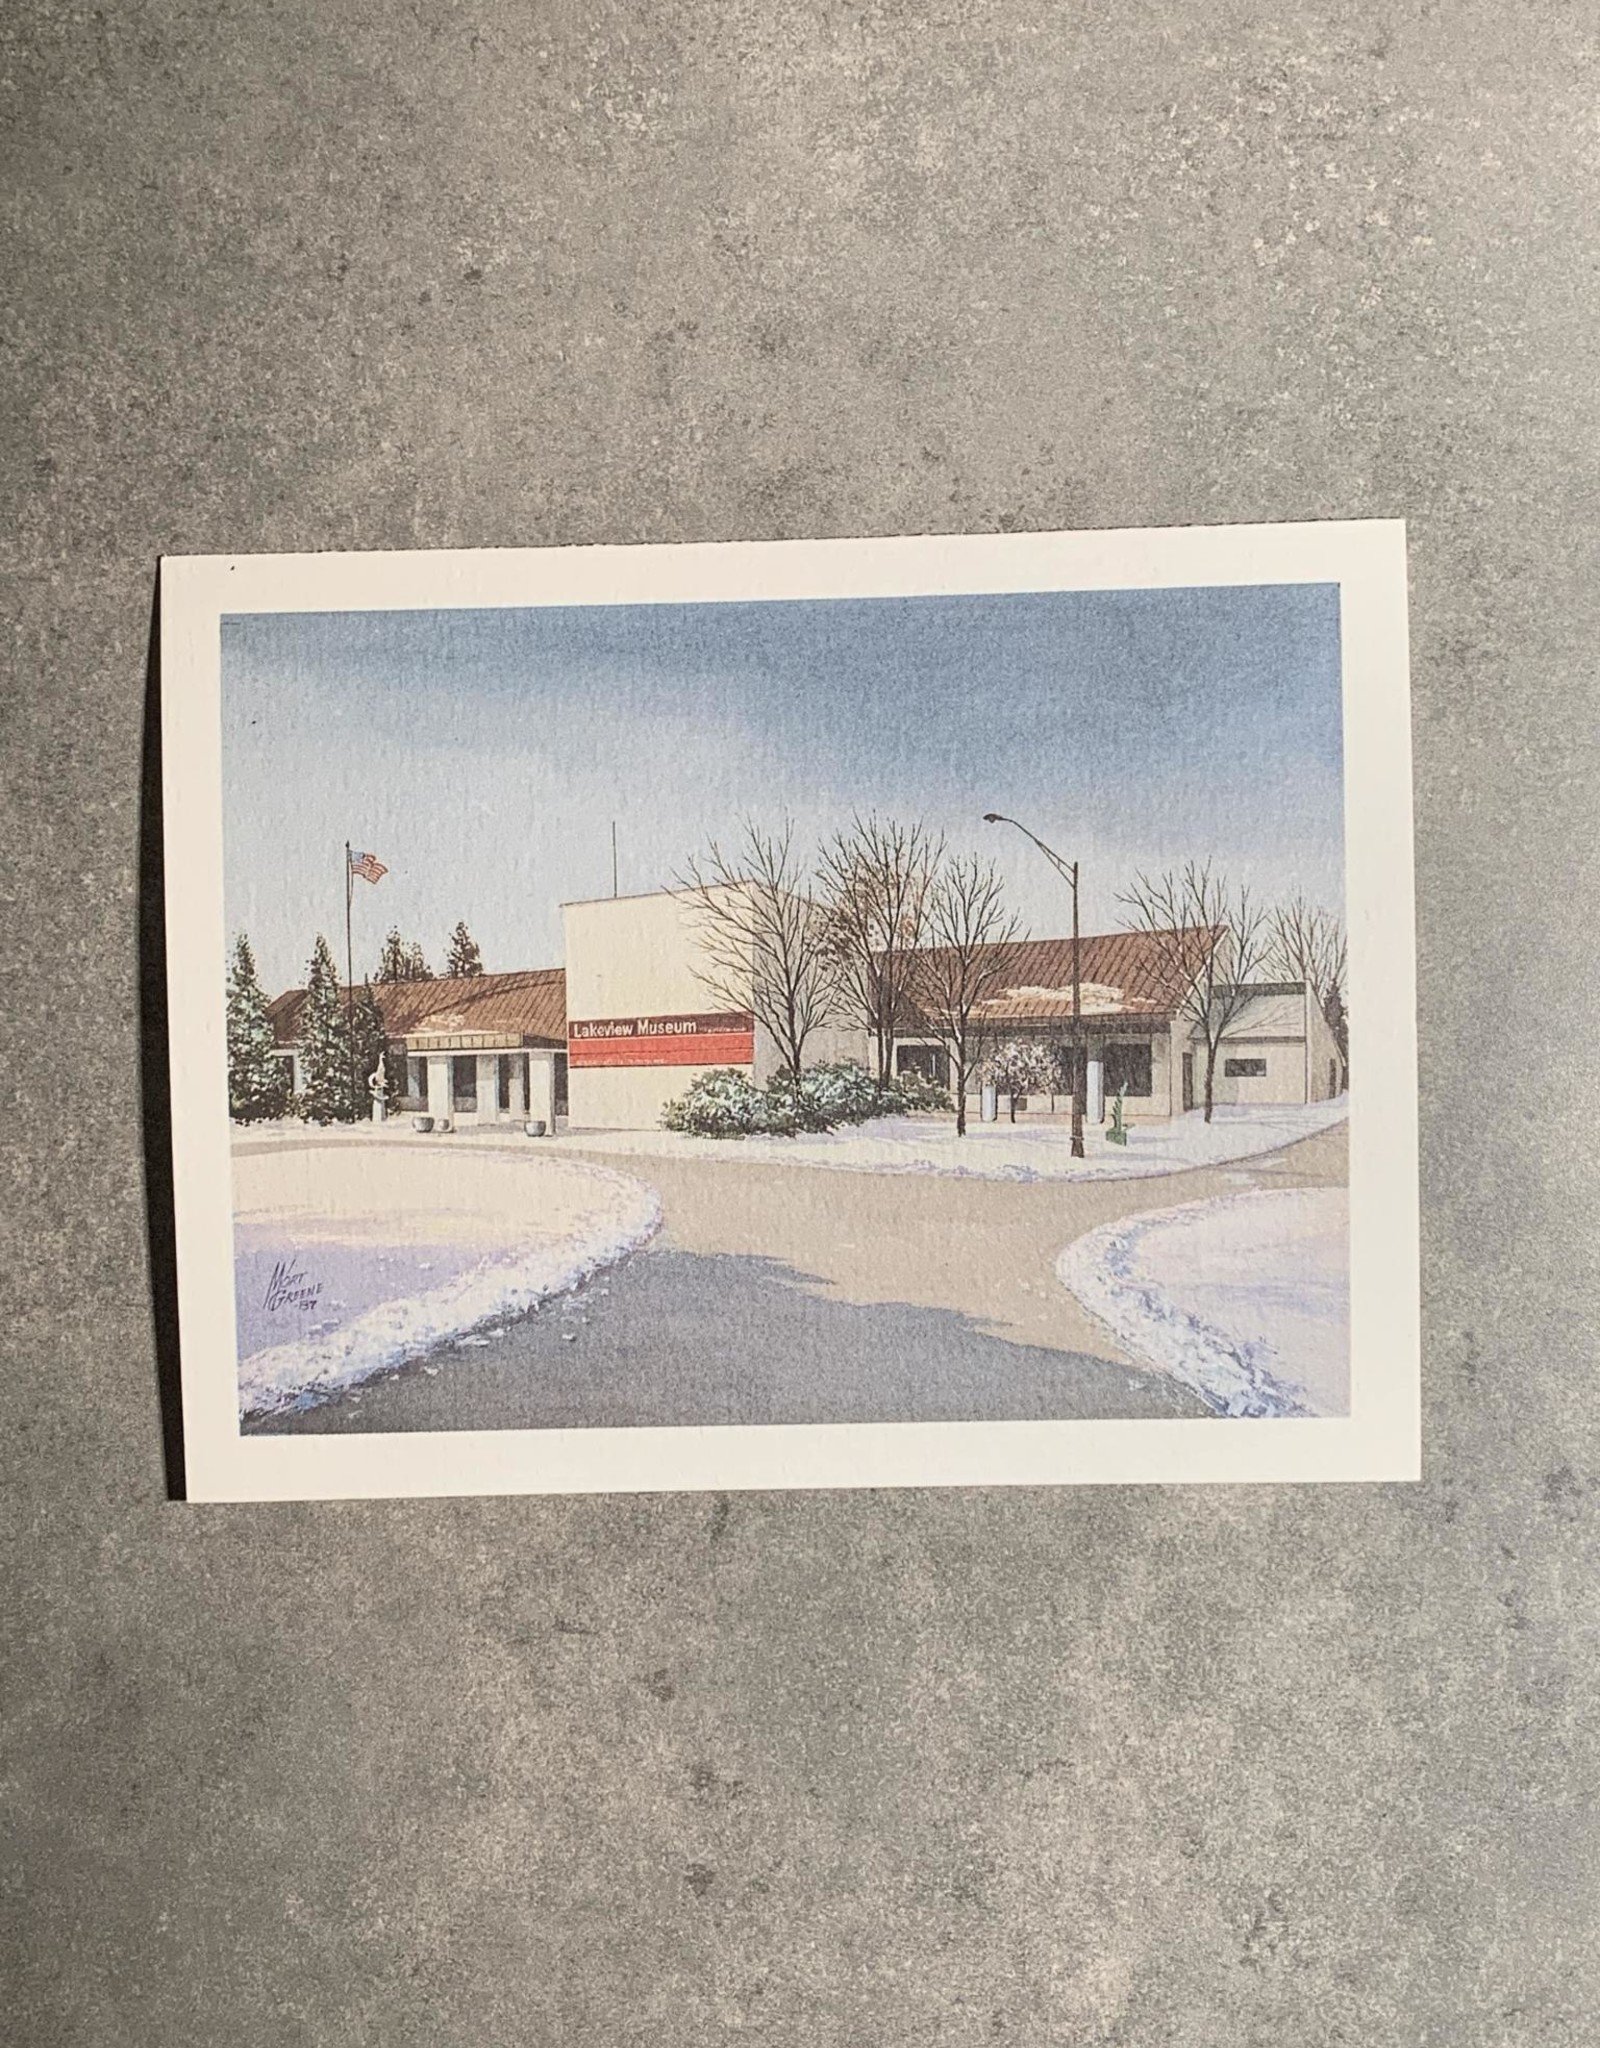 UA Merch Peoria Note Card by Mort Greene Lakeview Museum